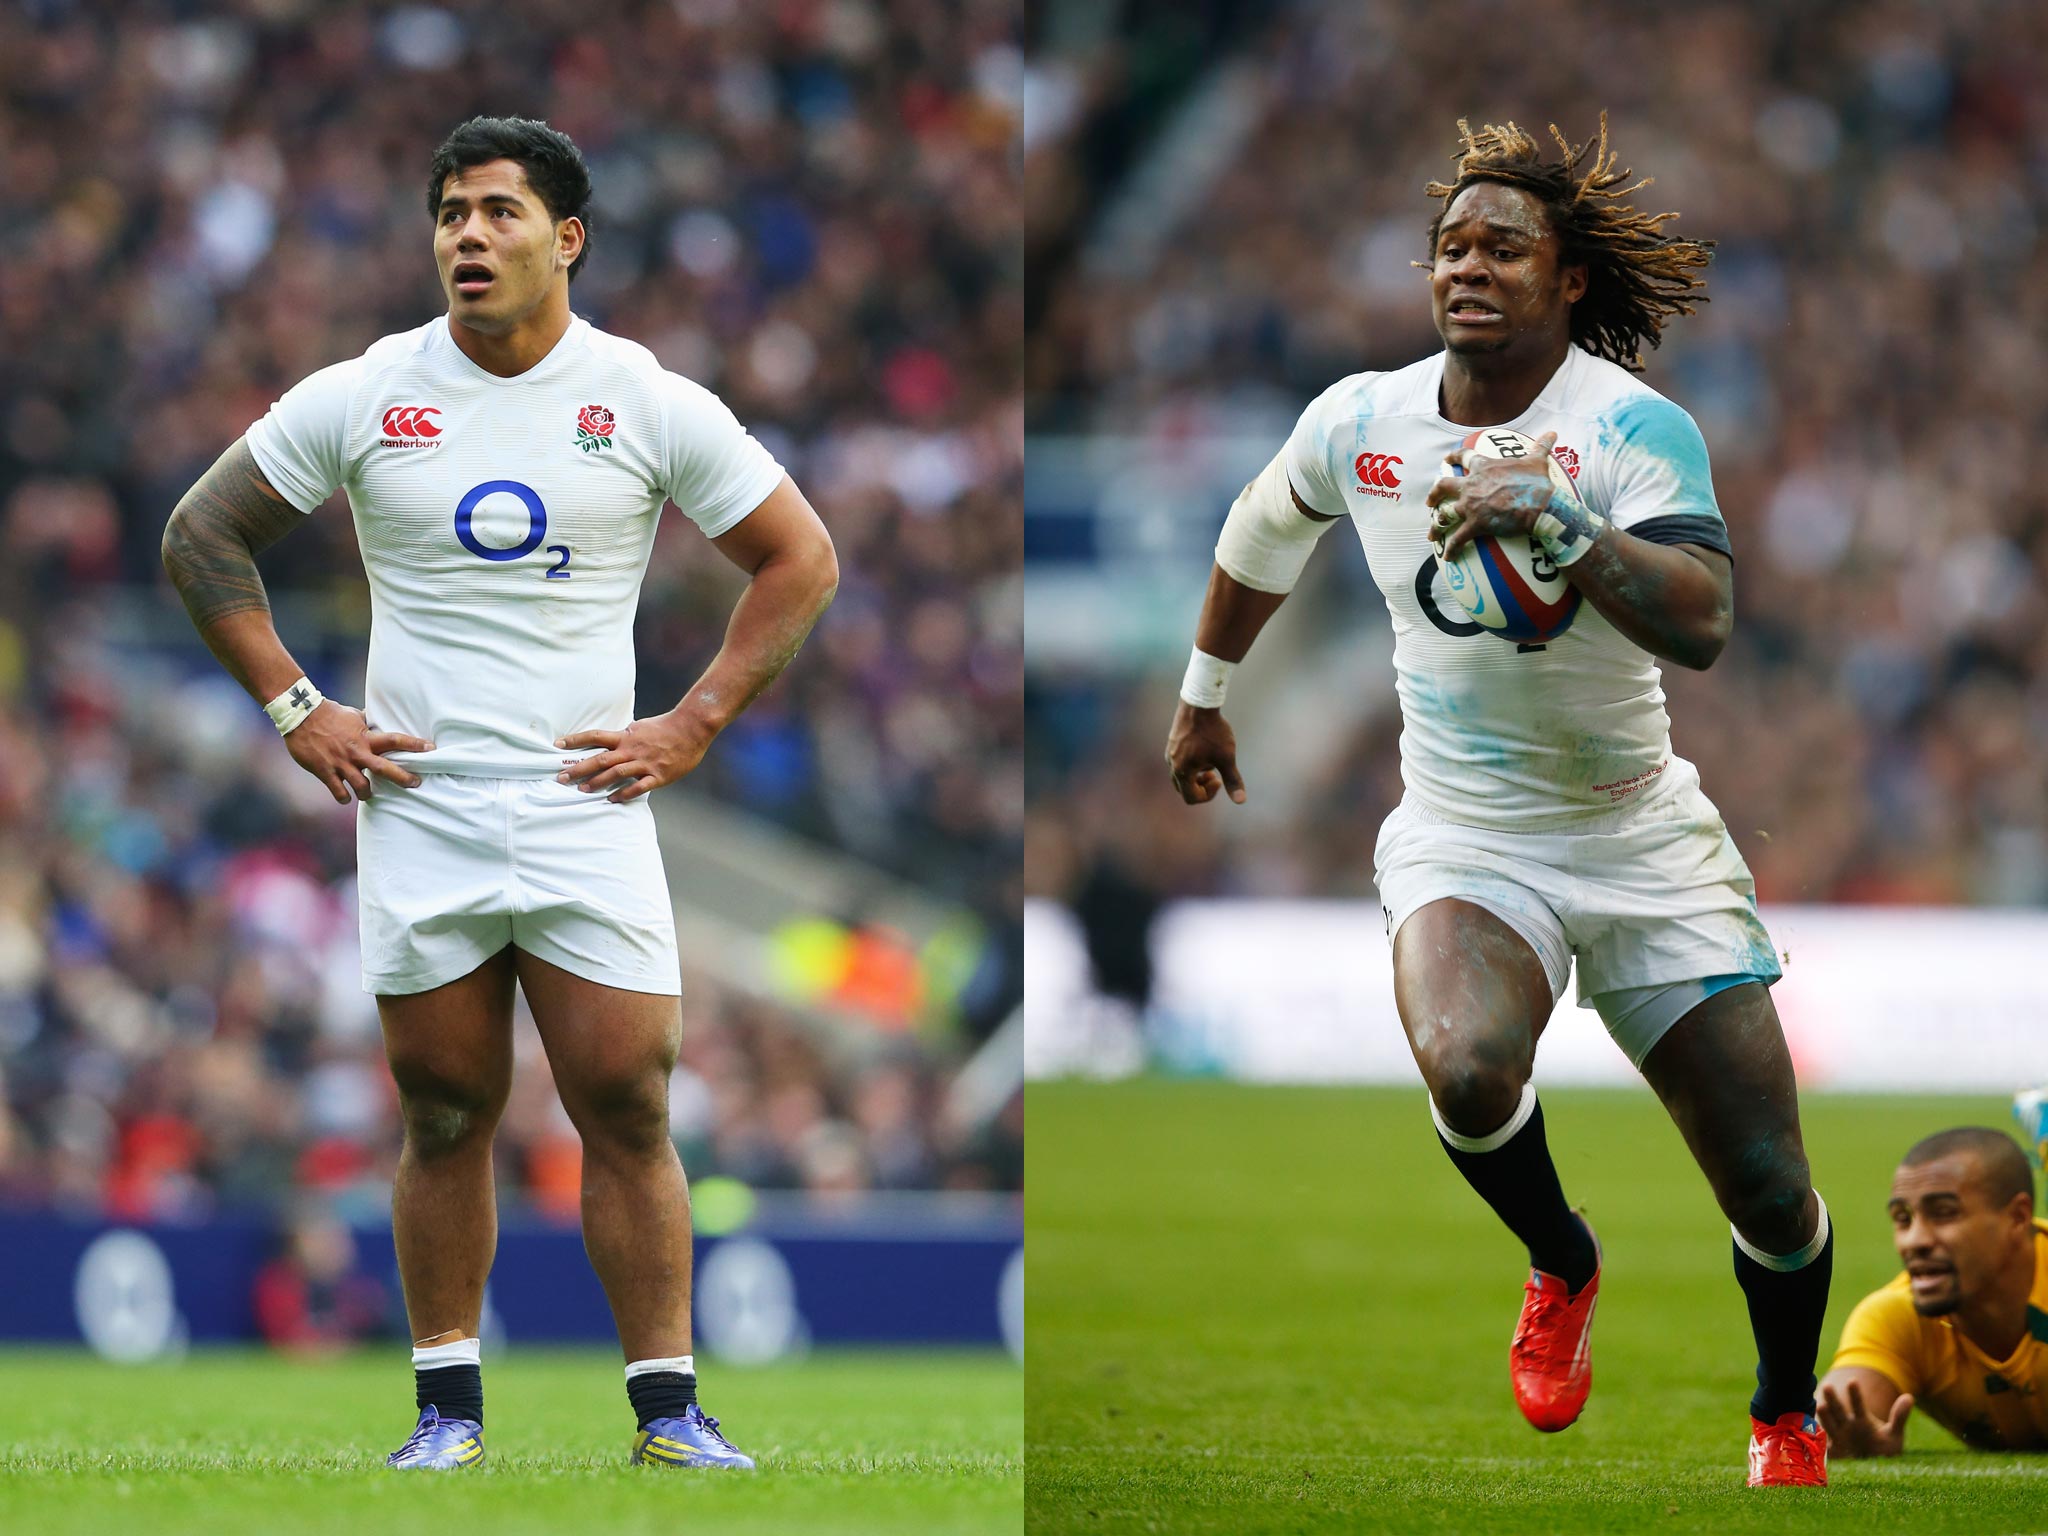 Manu Tuilagi and Marland Yarde have both recovered from respective injuries to return to the England squad ahead of the Six Nations tie with Wales